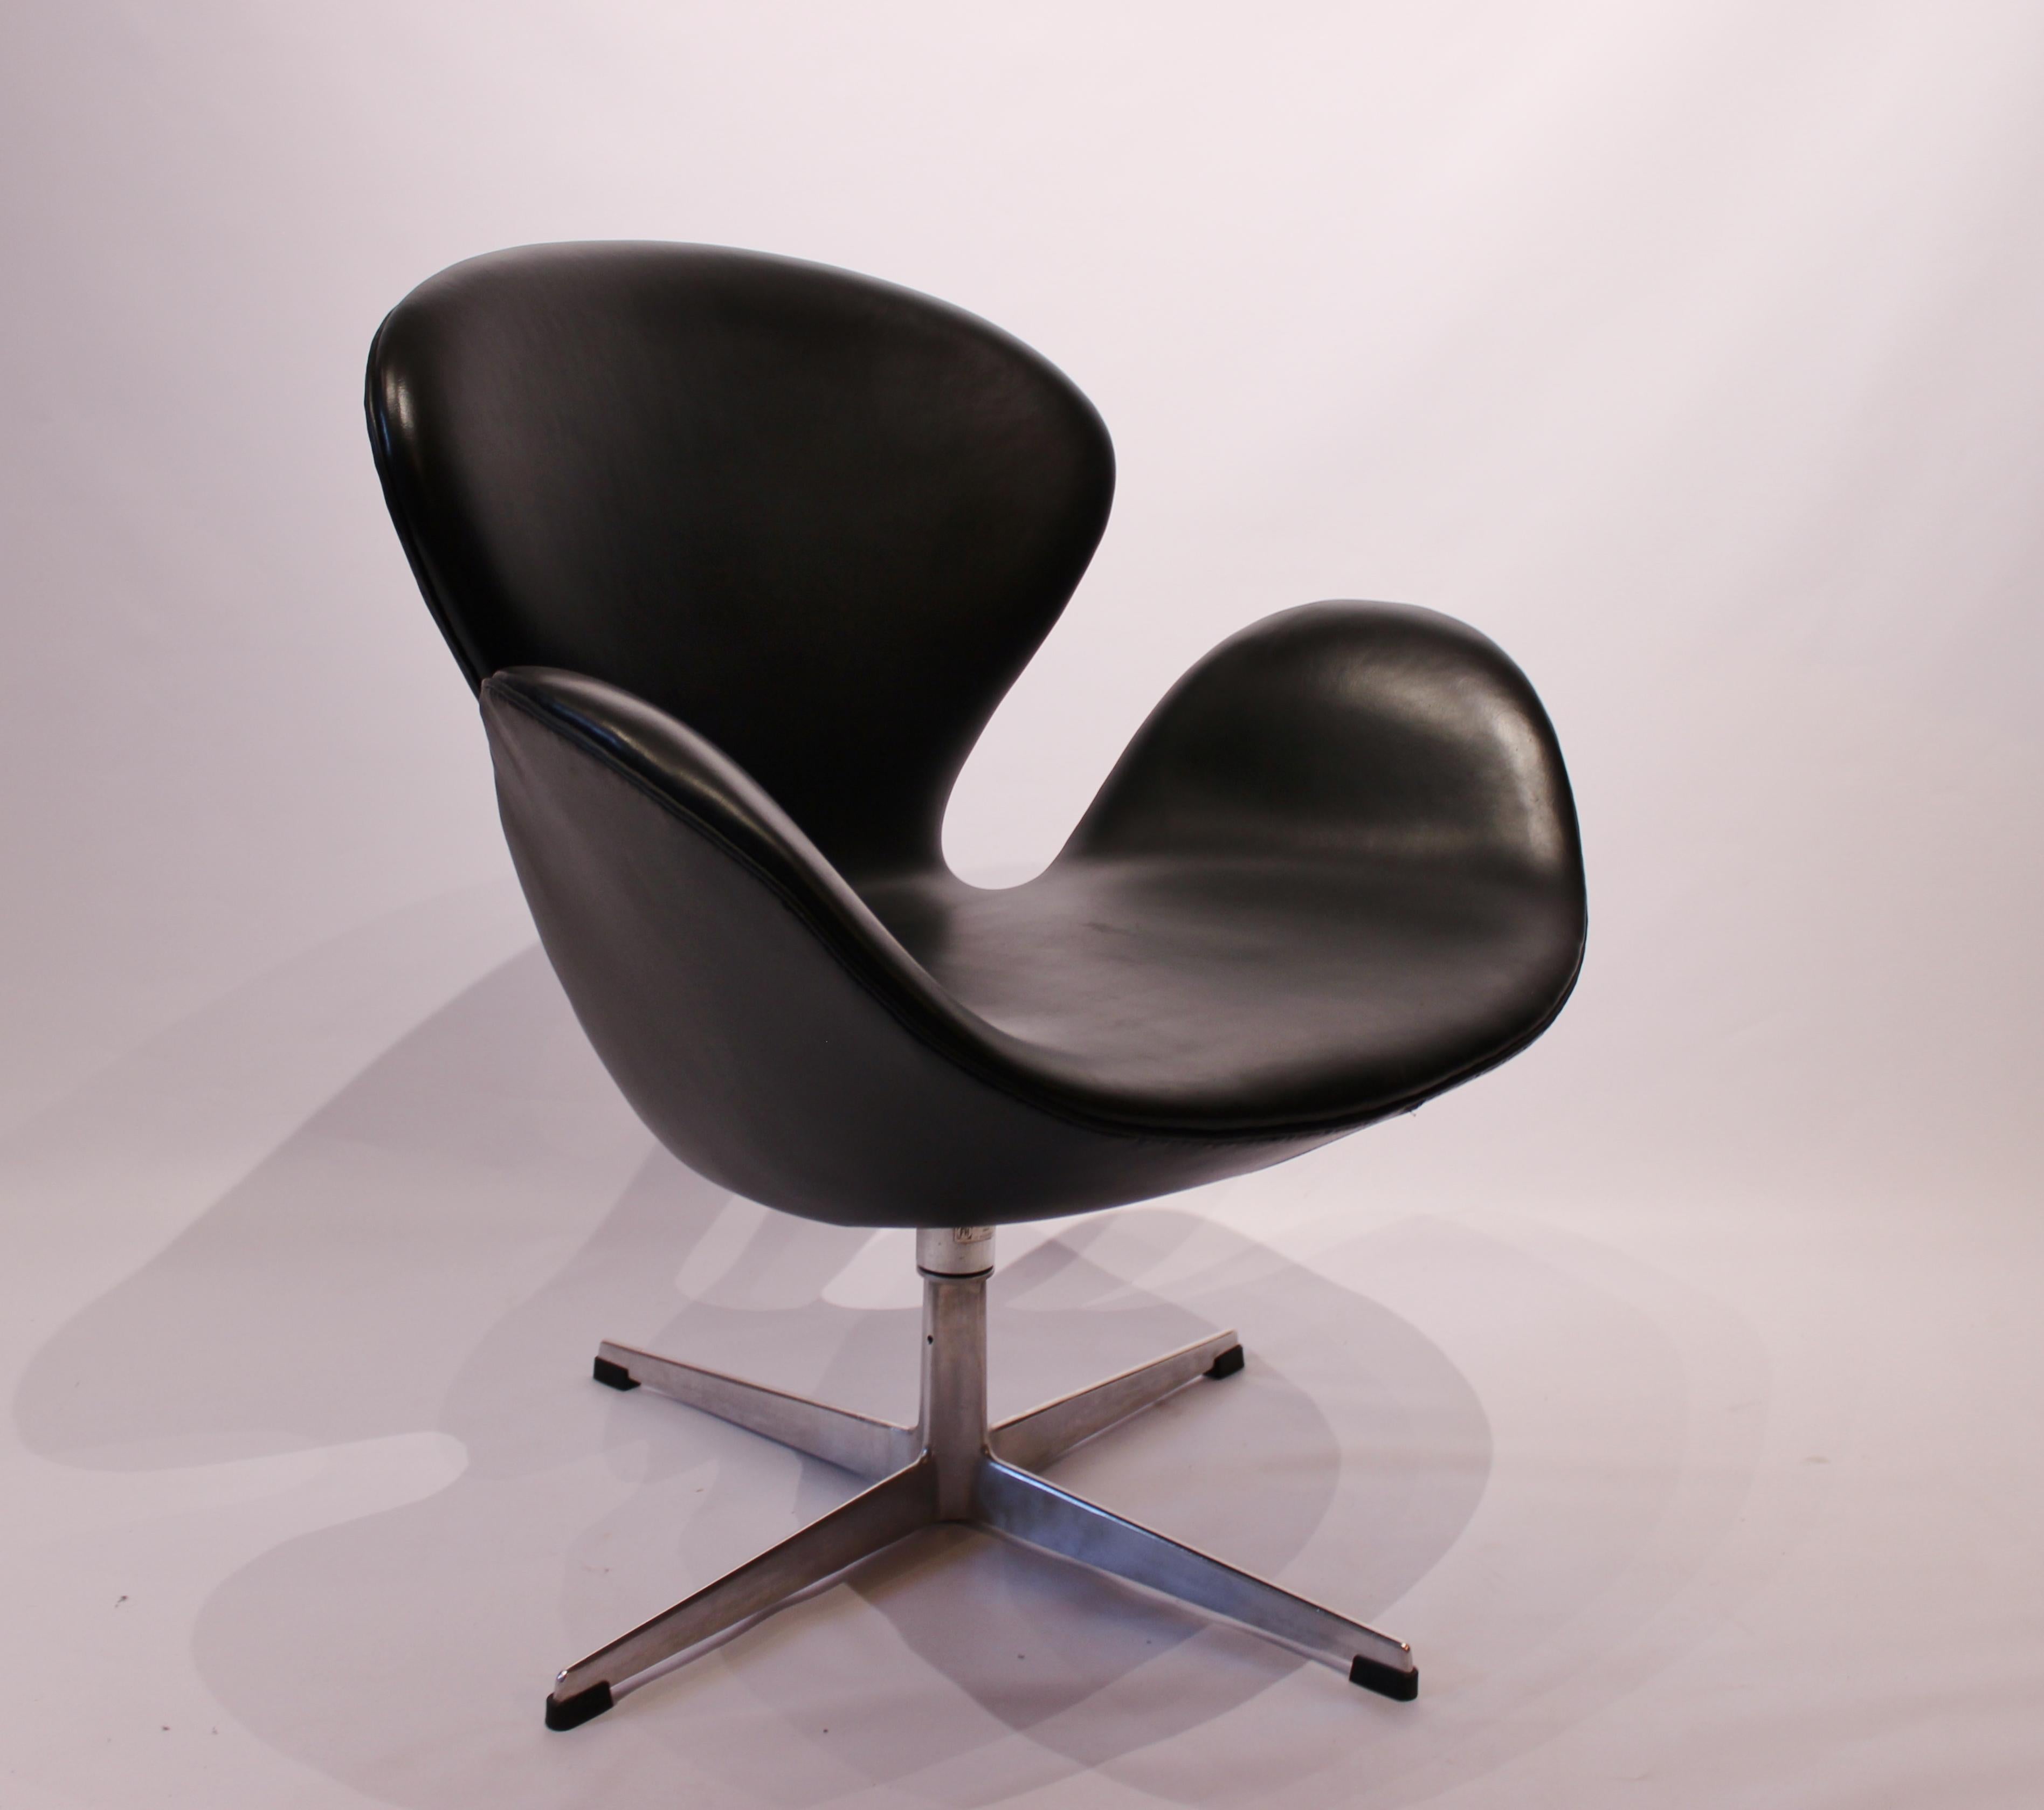 Swan chair, model 3320, designed by Arne Jacobsen in 1958 and manufactured by Fritz Hansen in 1950s. The chair is with original upholstery in black leather.